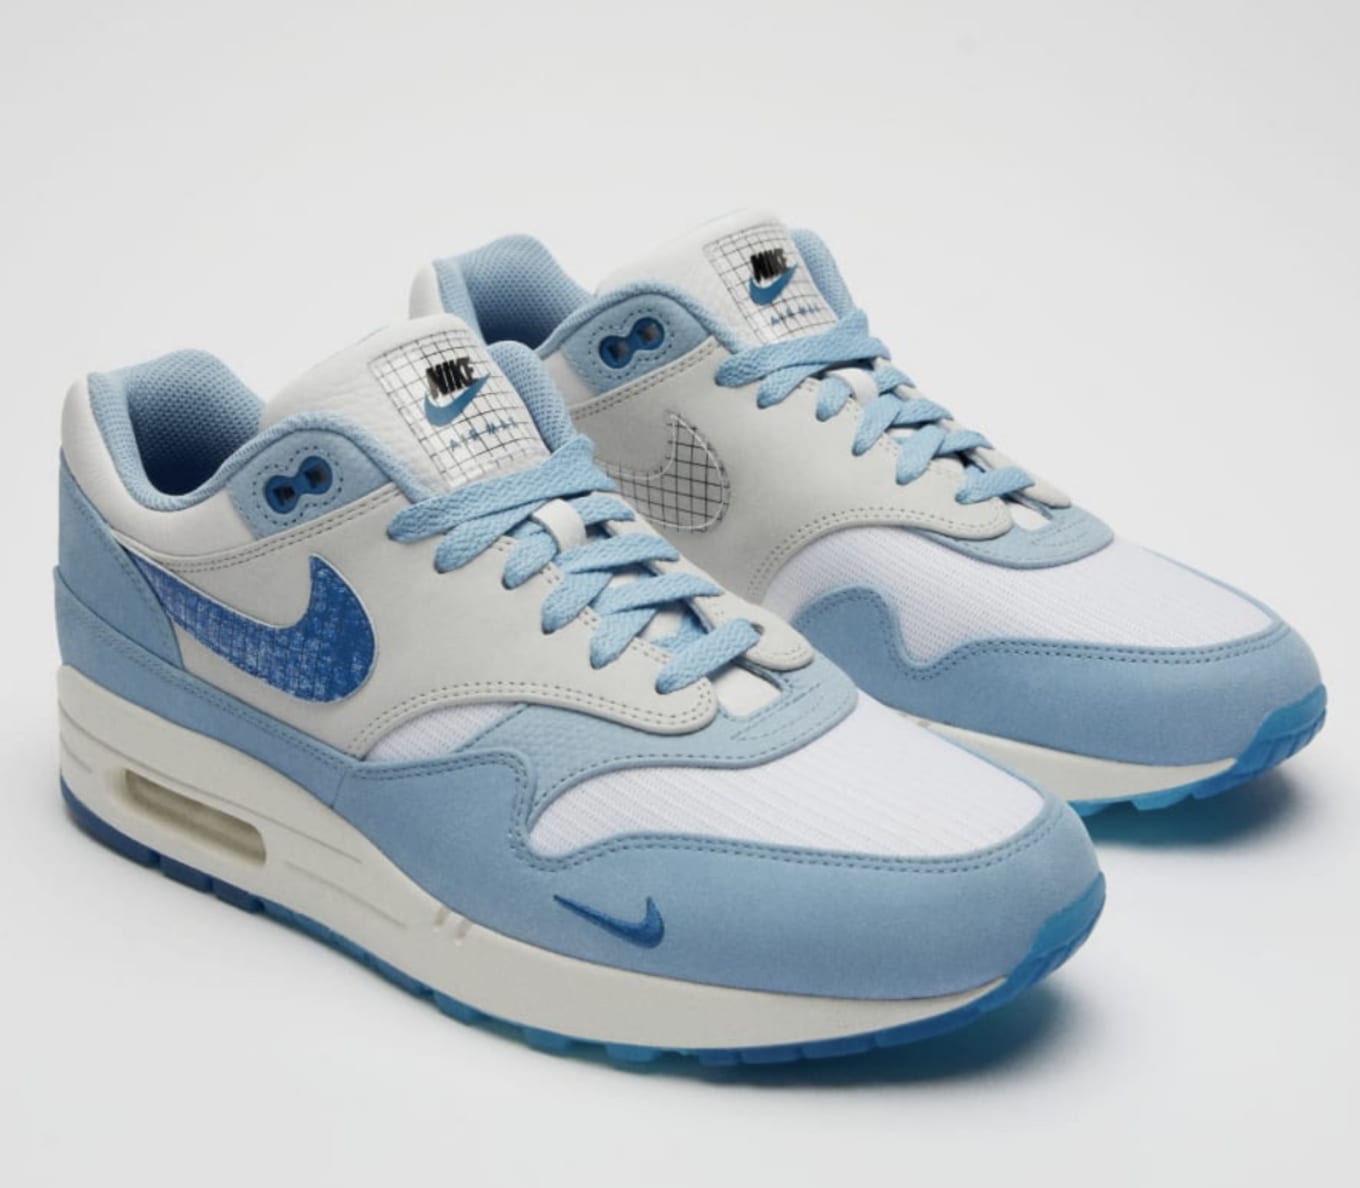 kolonie brandwond Psychiatrie Nike Air Max 1 'Air Max Day' Release Date March 2022 | Sole Collector